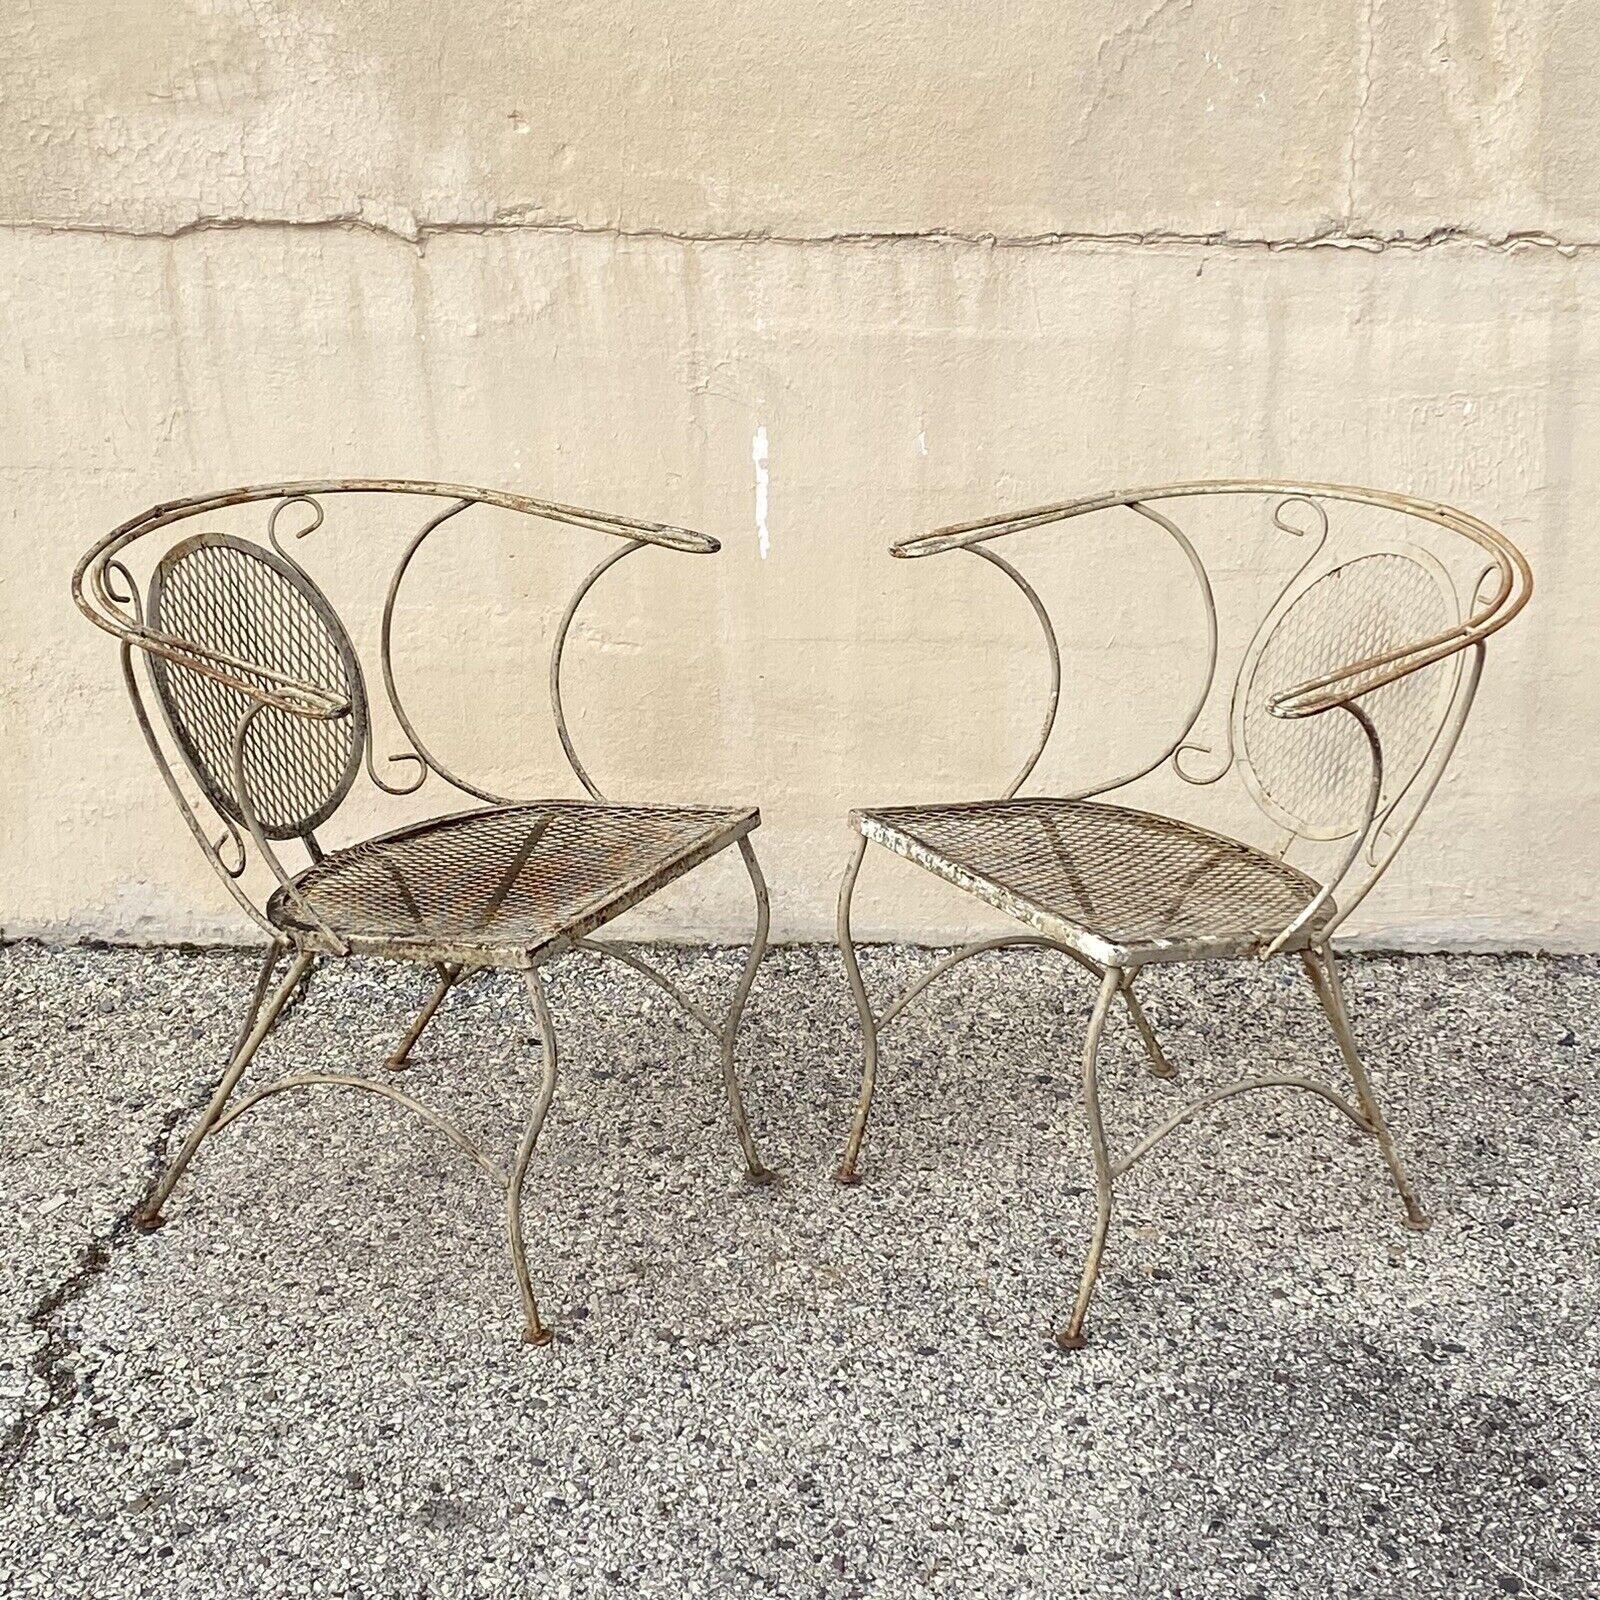 Vintage Mid Century Wrought Iron Barrel Back Garden Patio Dining Chairs - A Pair For Sale 4